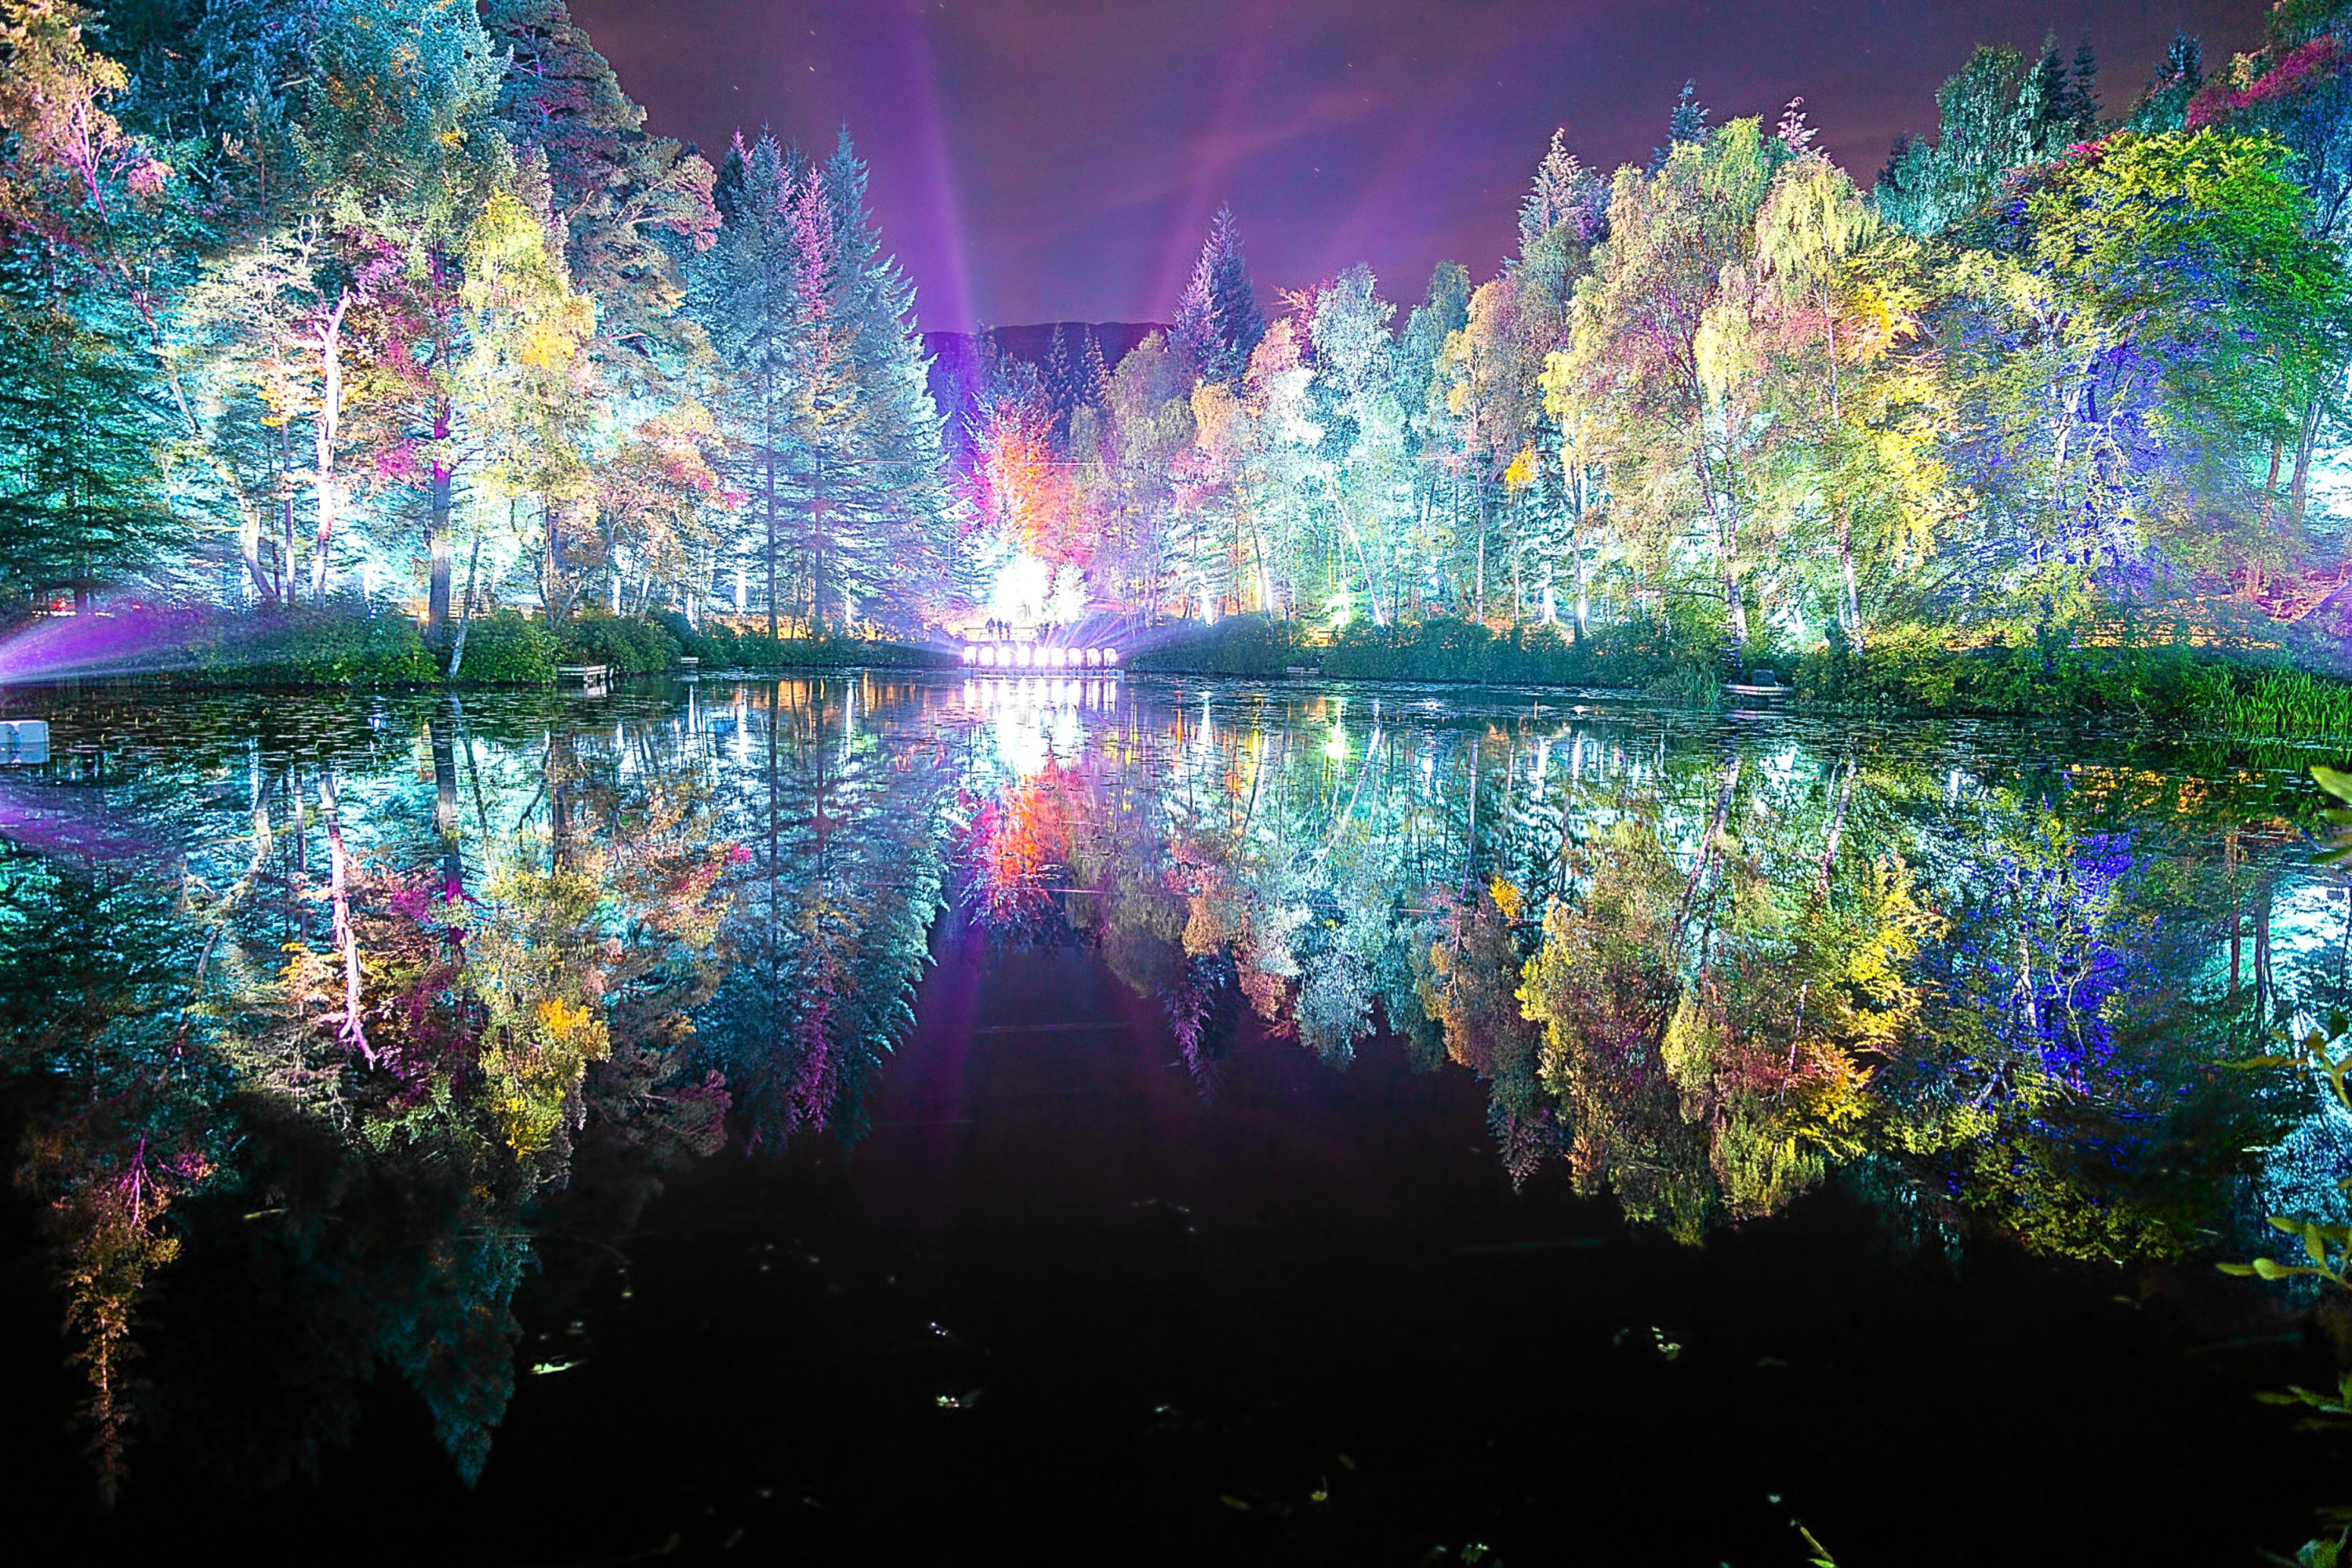 The Enchanted Forest has released 65,000 tickets for its 15th anniversary show.